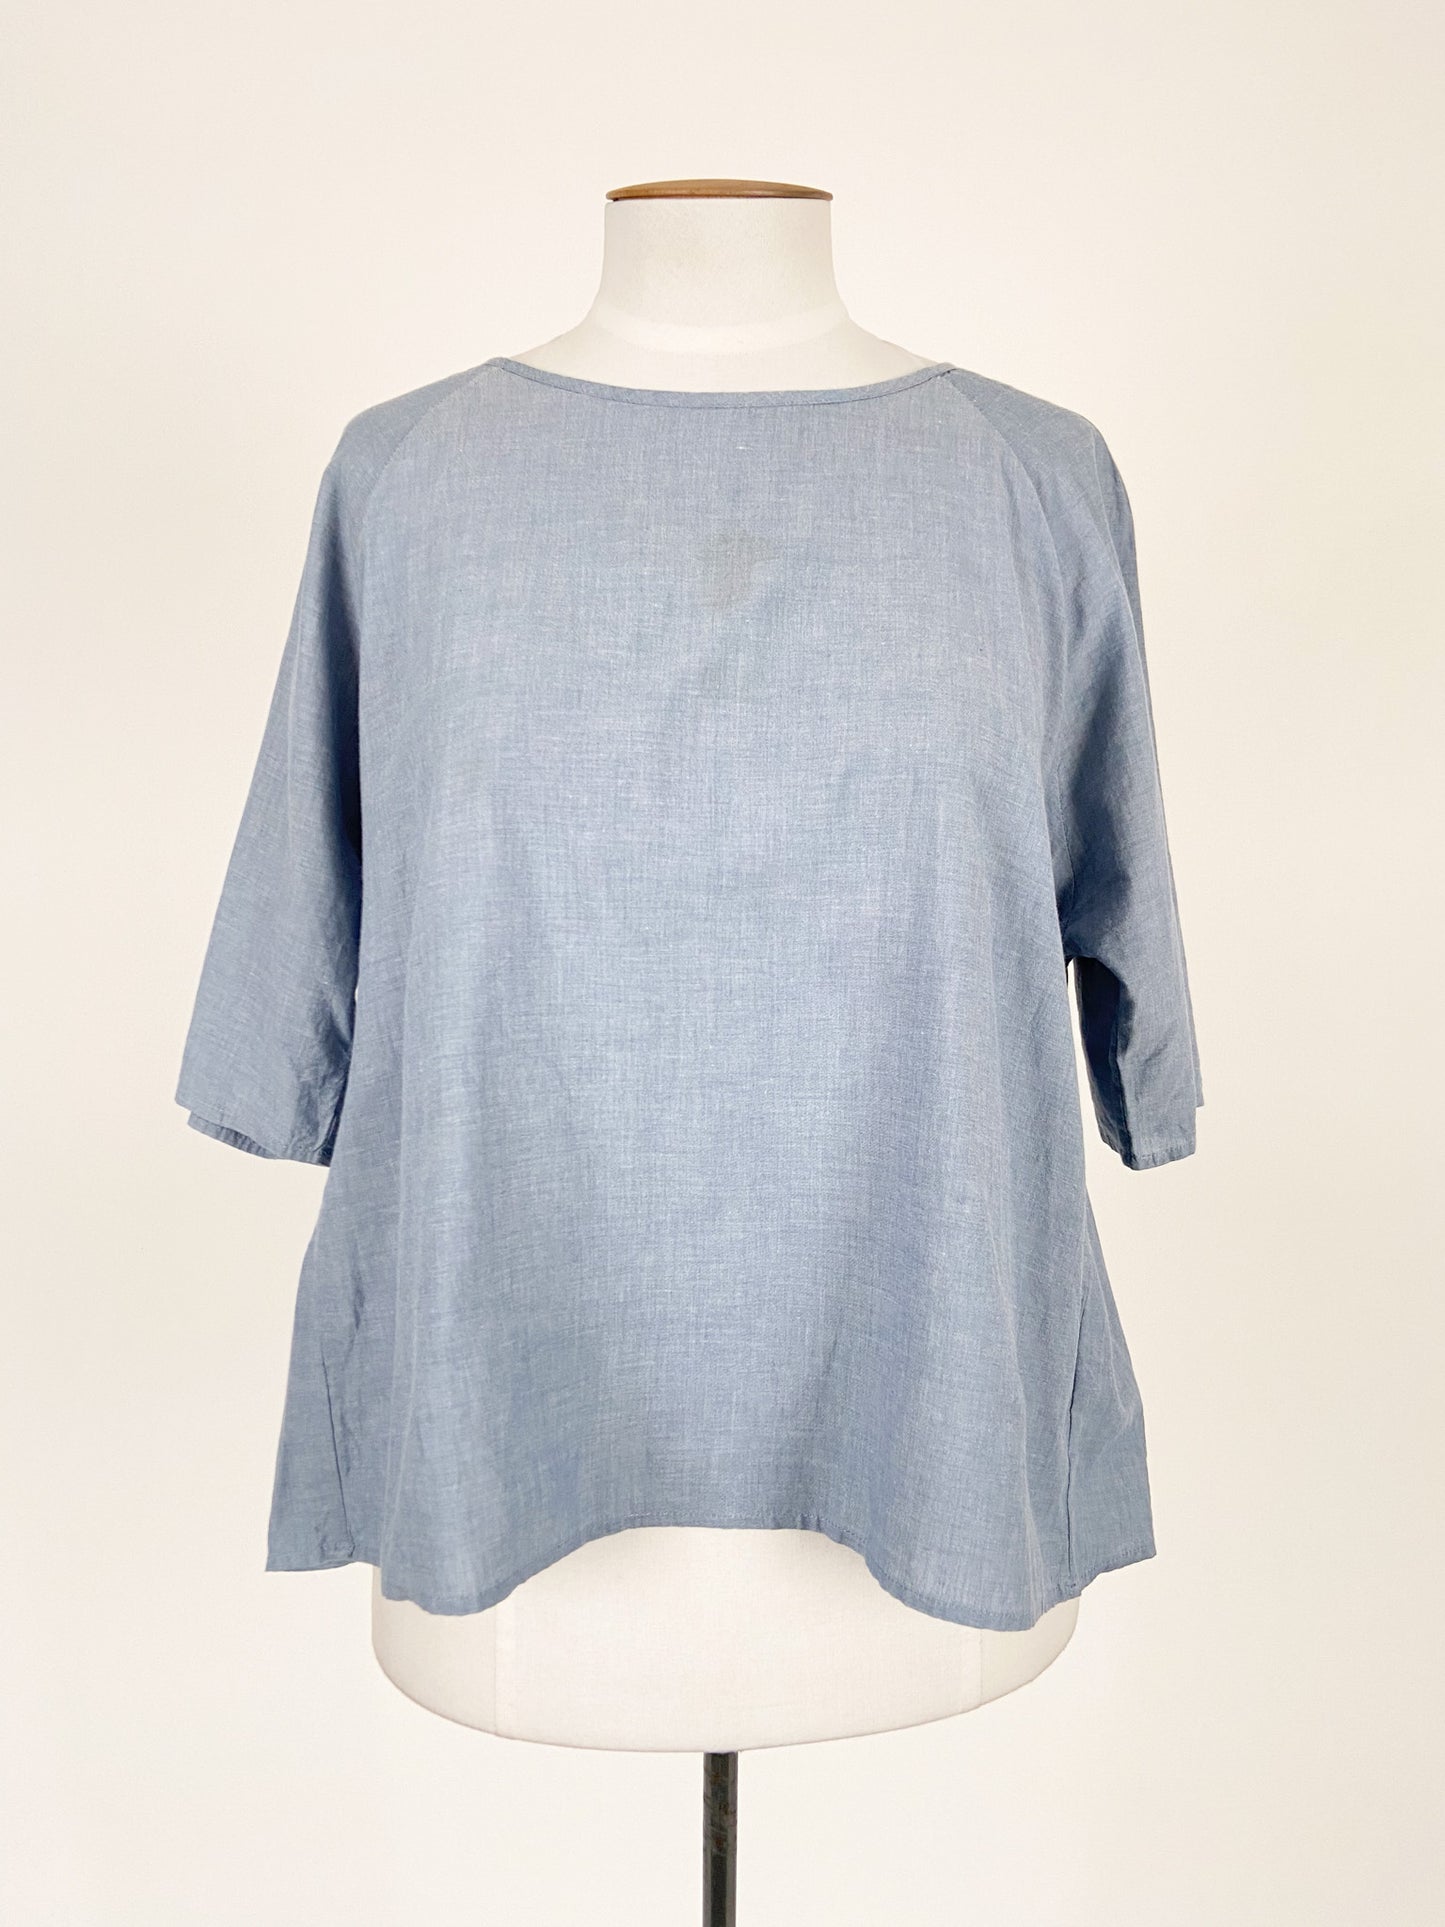 Kowtow | Navy Casual Top | Size S